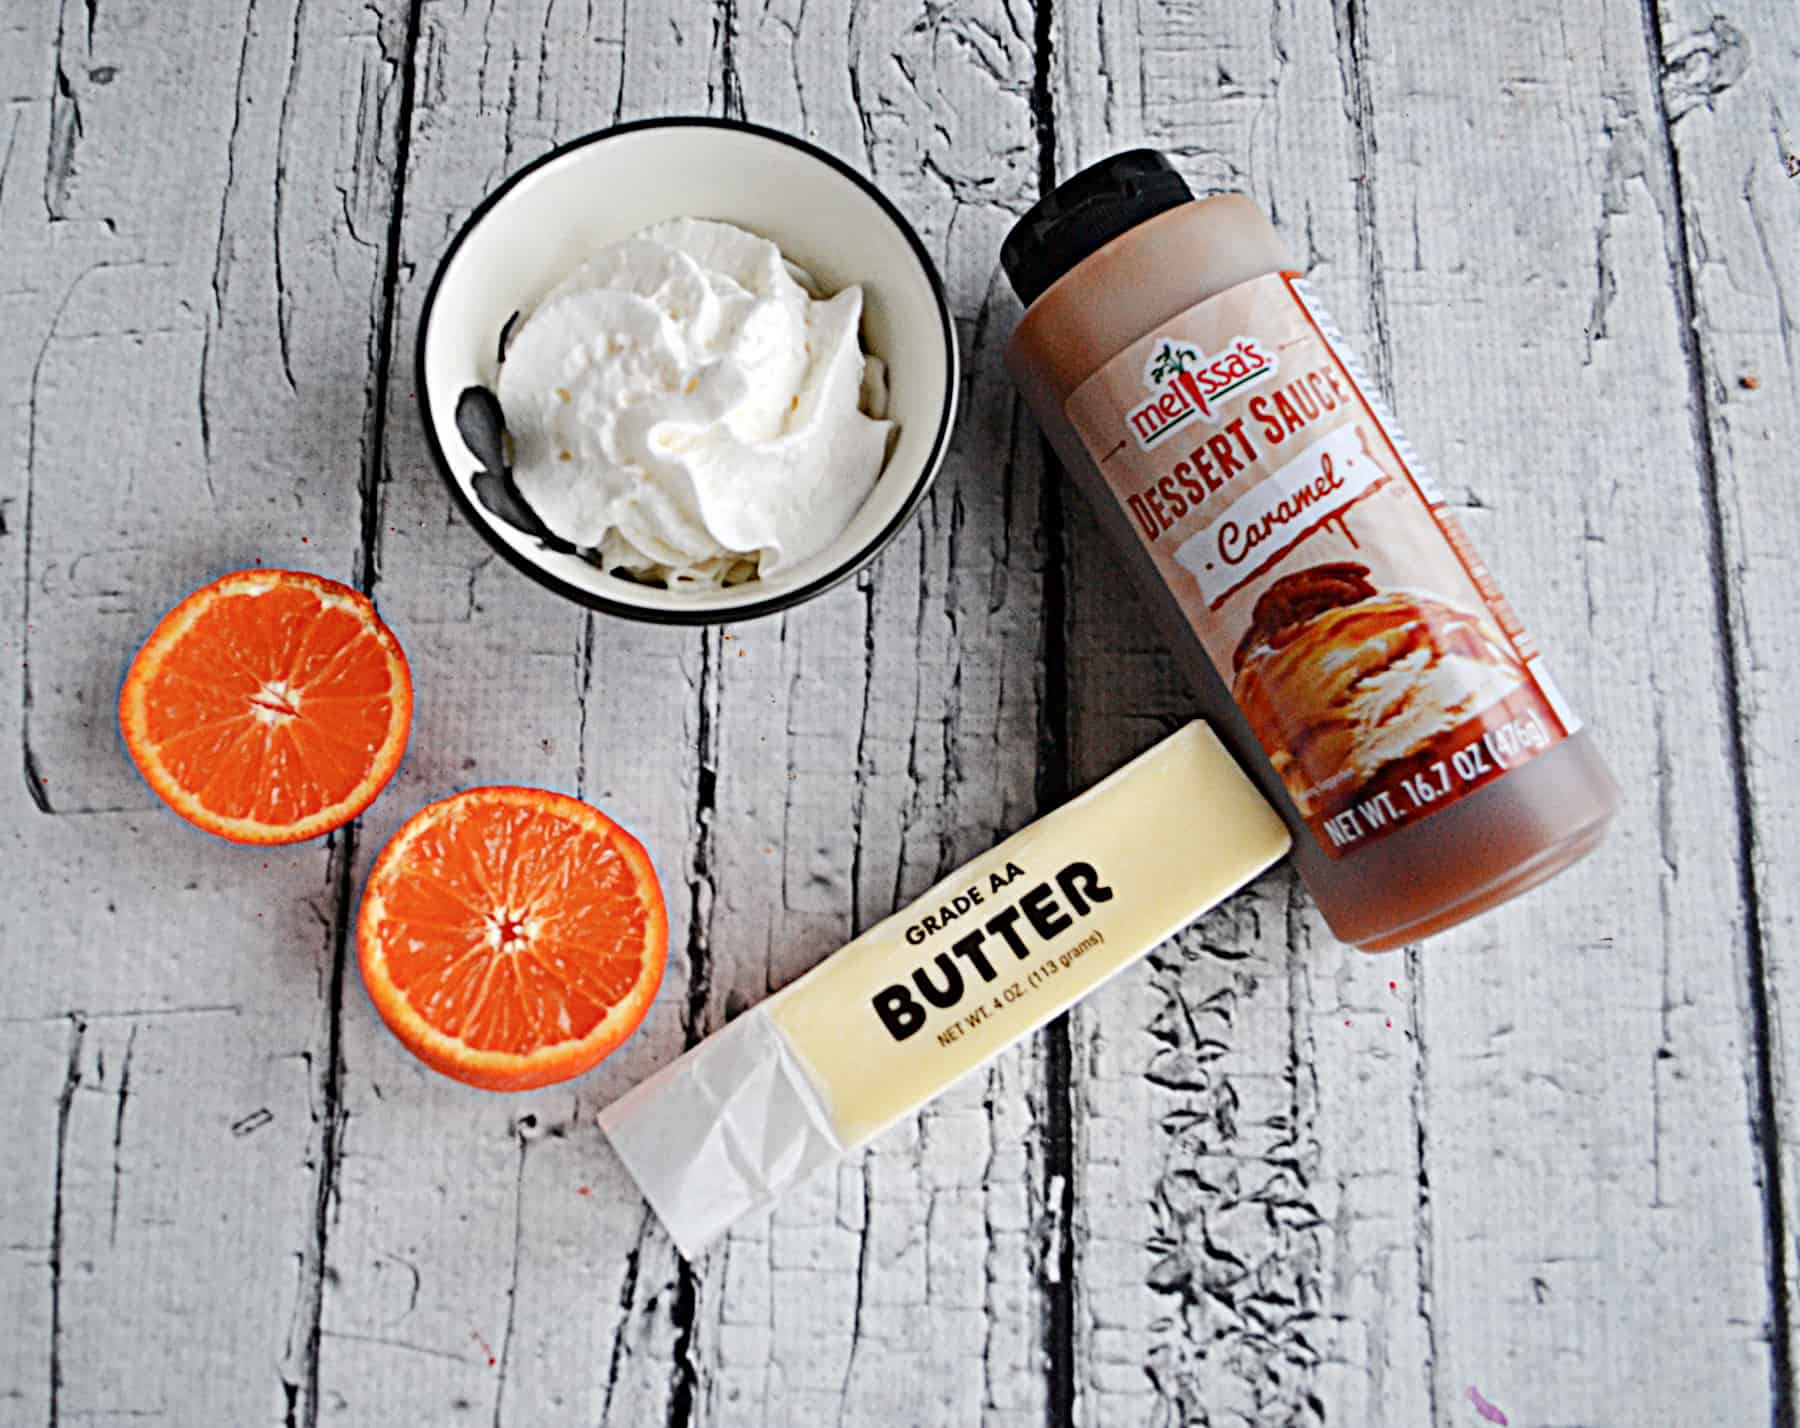 A bottle of caramel sauce, whipped cream, a tangerine, and a stick of butter.